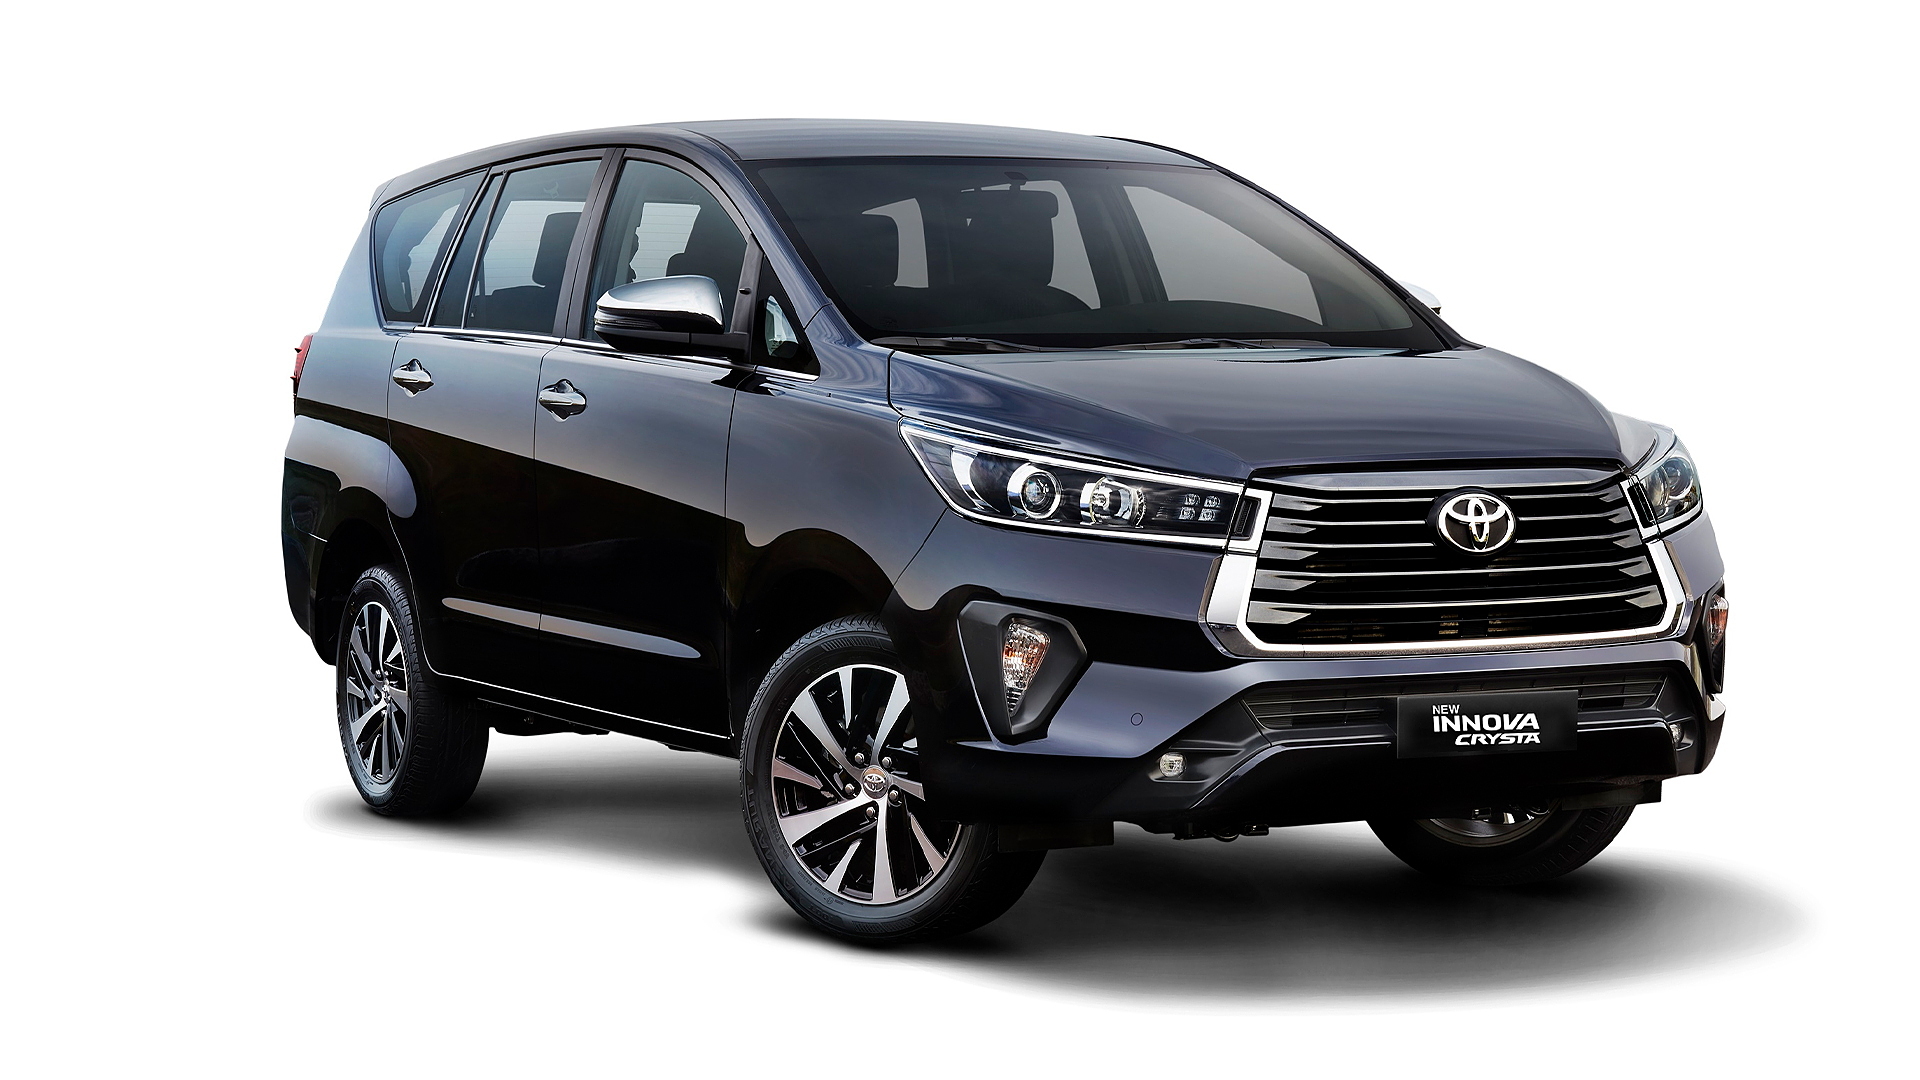 Toyota Innova Crysta Limited Edition with cool features launched in India